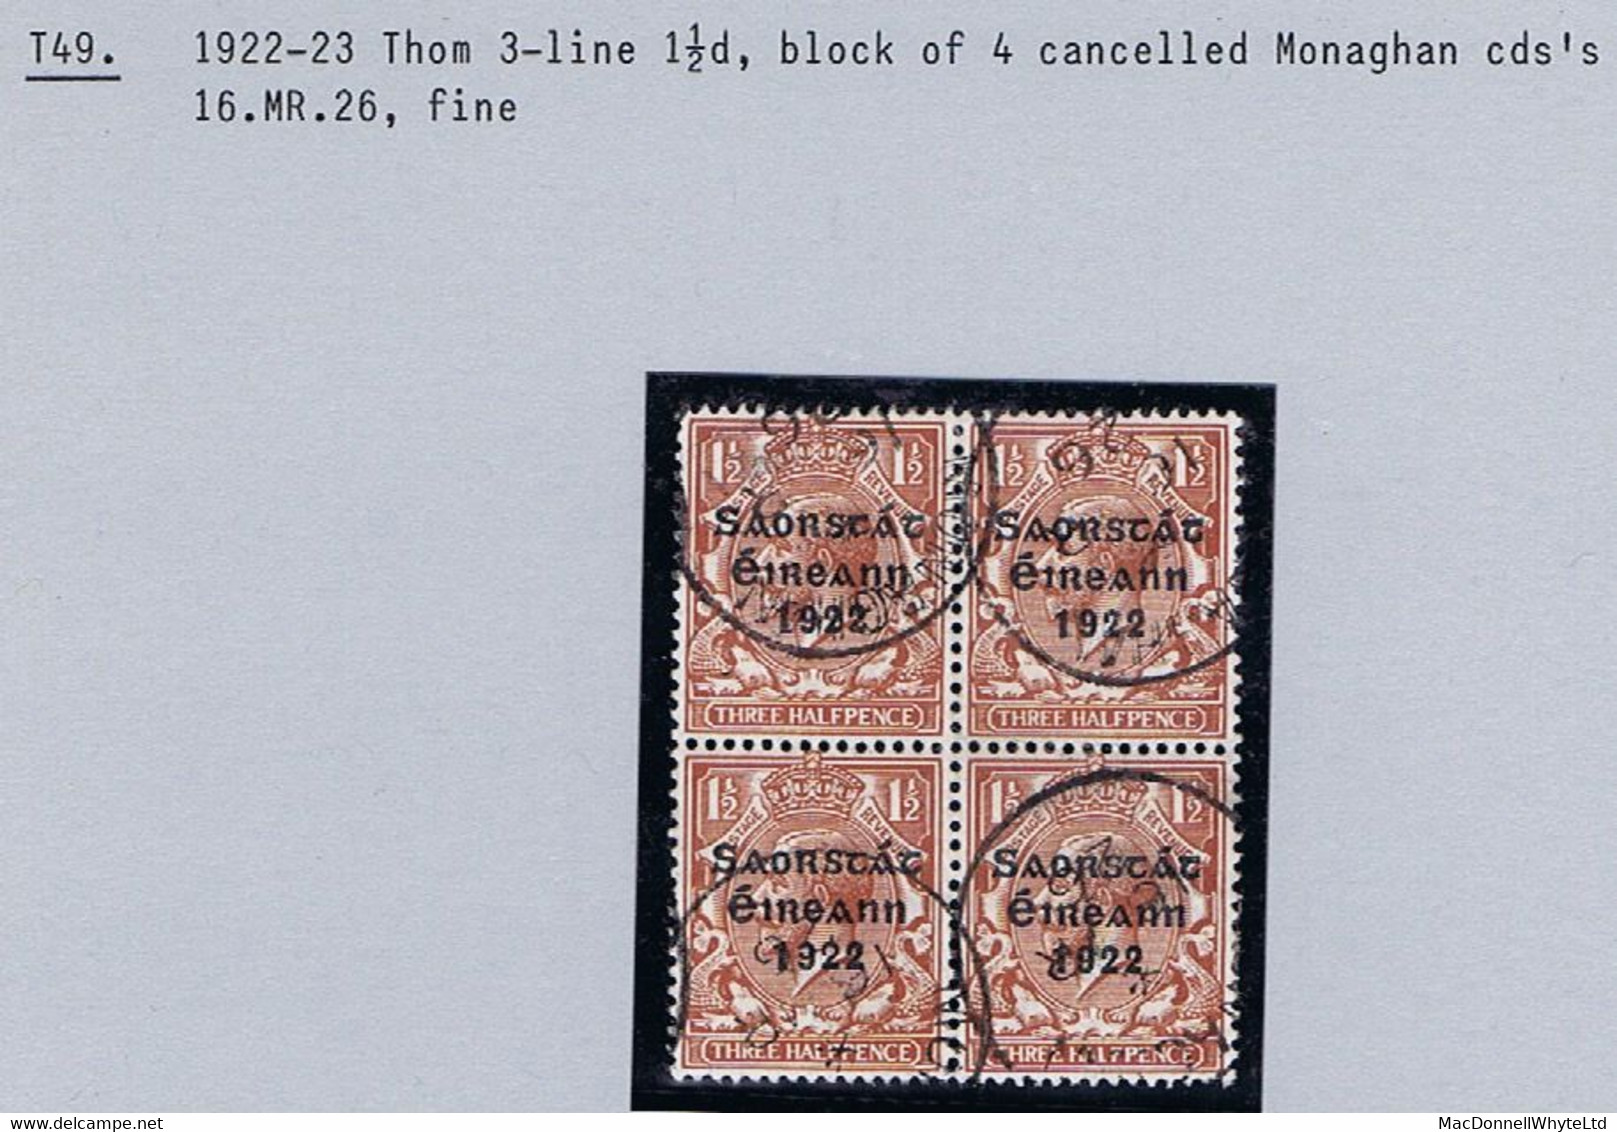 Ireland 1922-23 Thom Saorstat 3-line Ovpt On 1½d Brown Used Block Of 4, MONAGHAN 16 MR 26 Small Steel Cds - Used Stamps